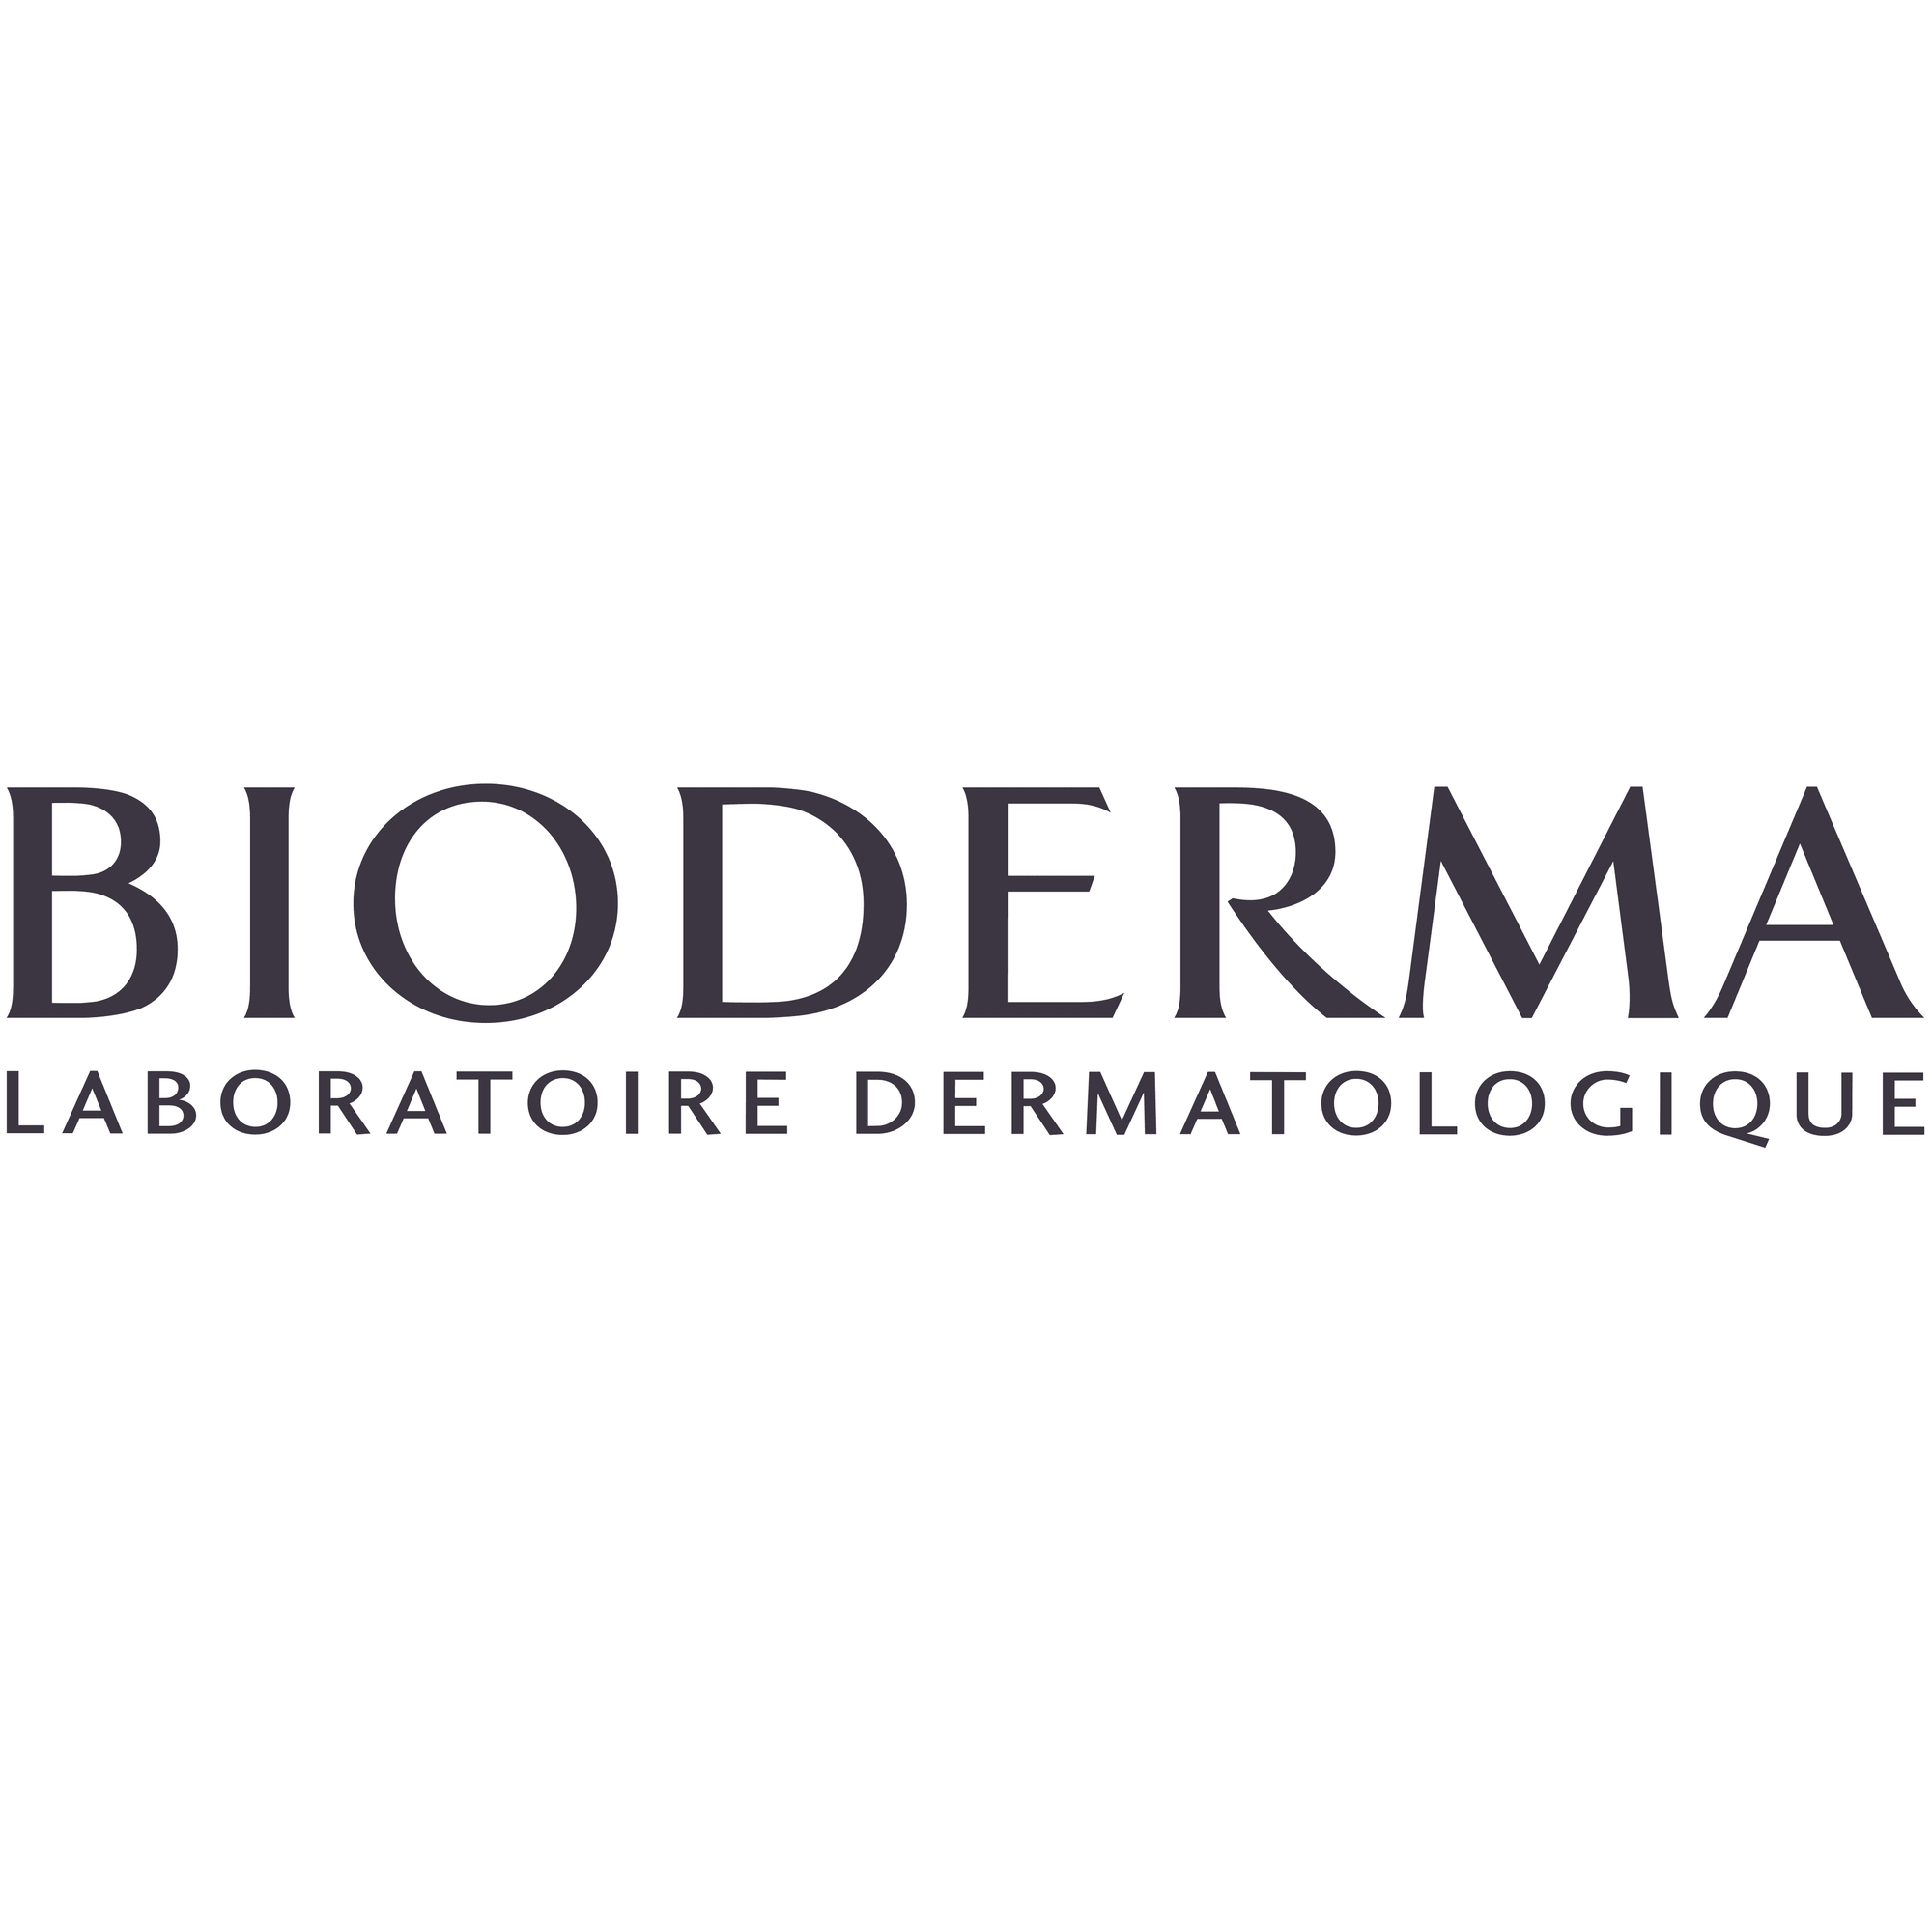 Buy BioDerma Products at best price Online in Pakistan